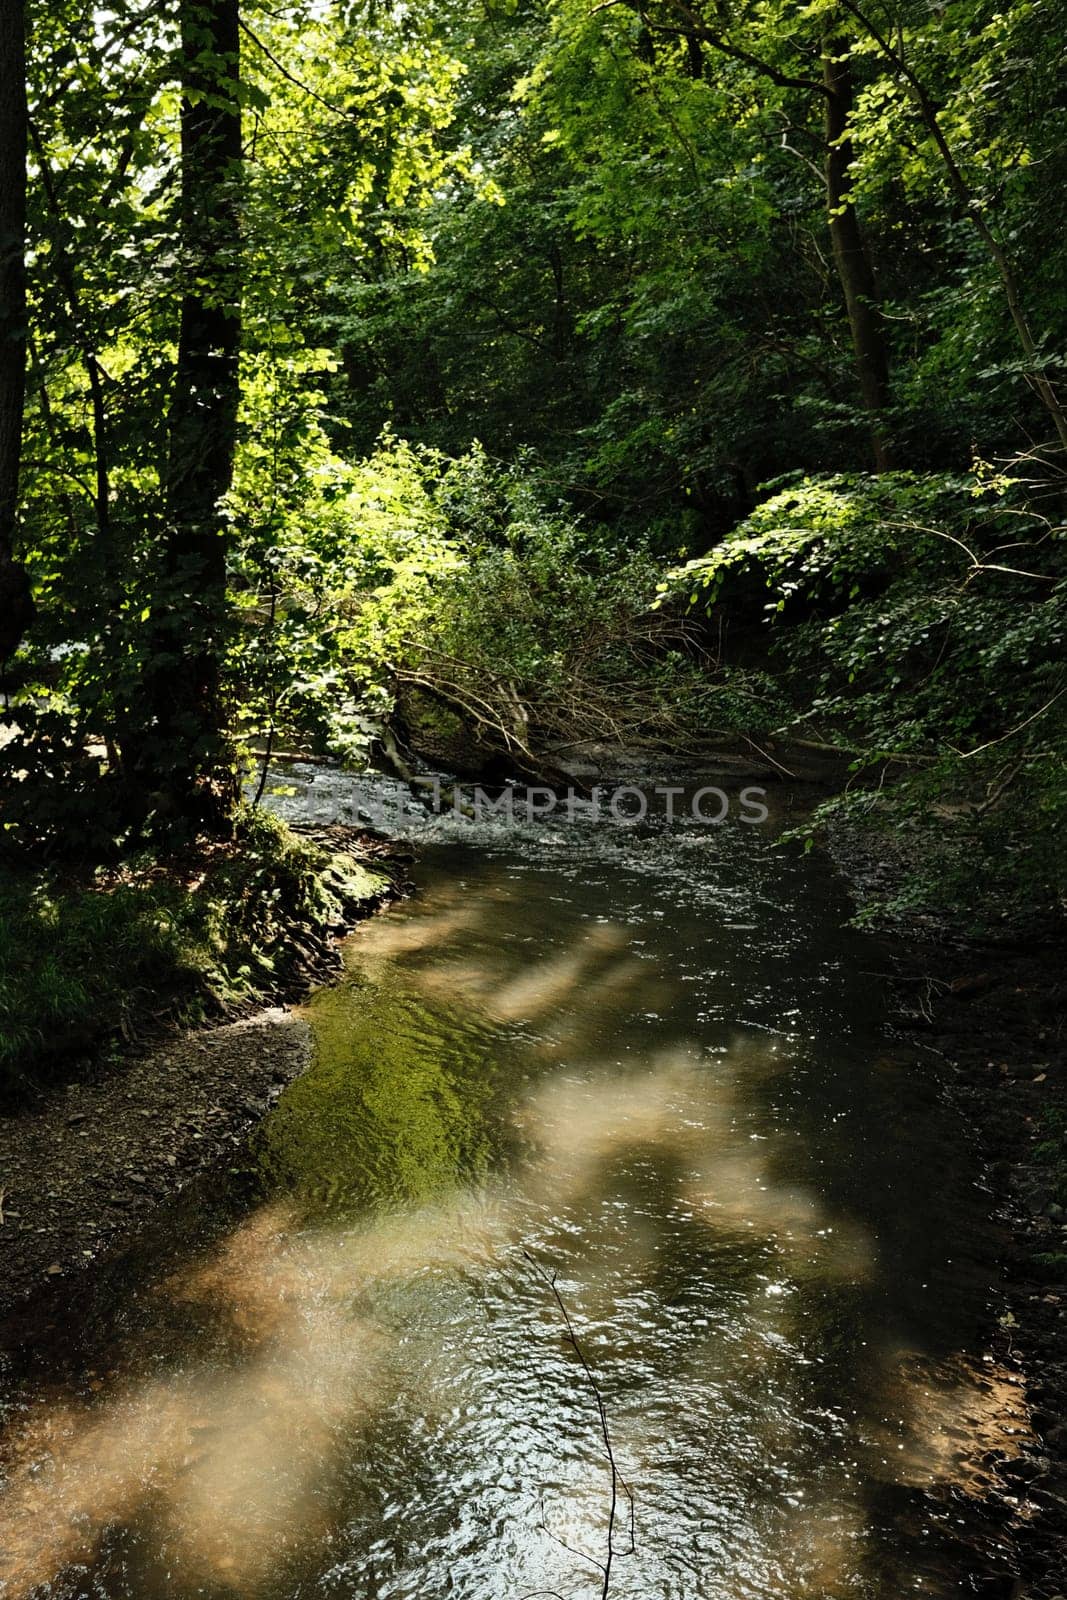 River in the Neander valley near Mettmann town, Germany, vertical shot